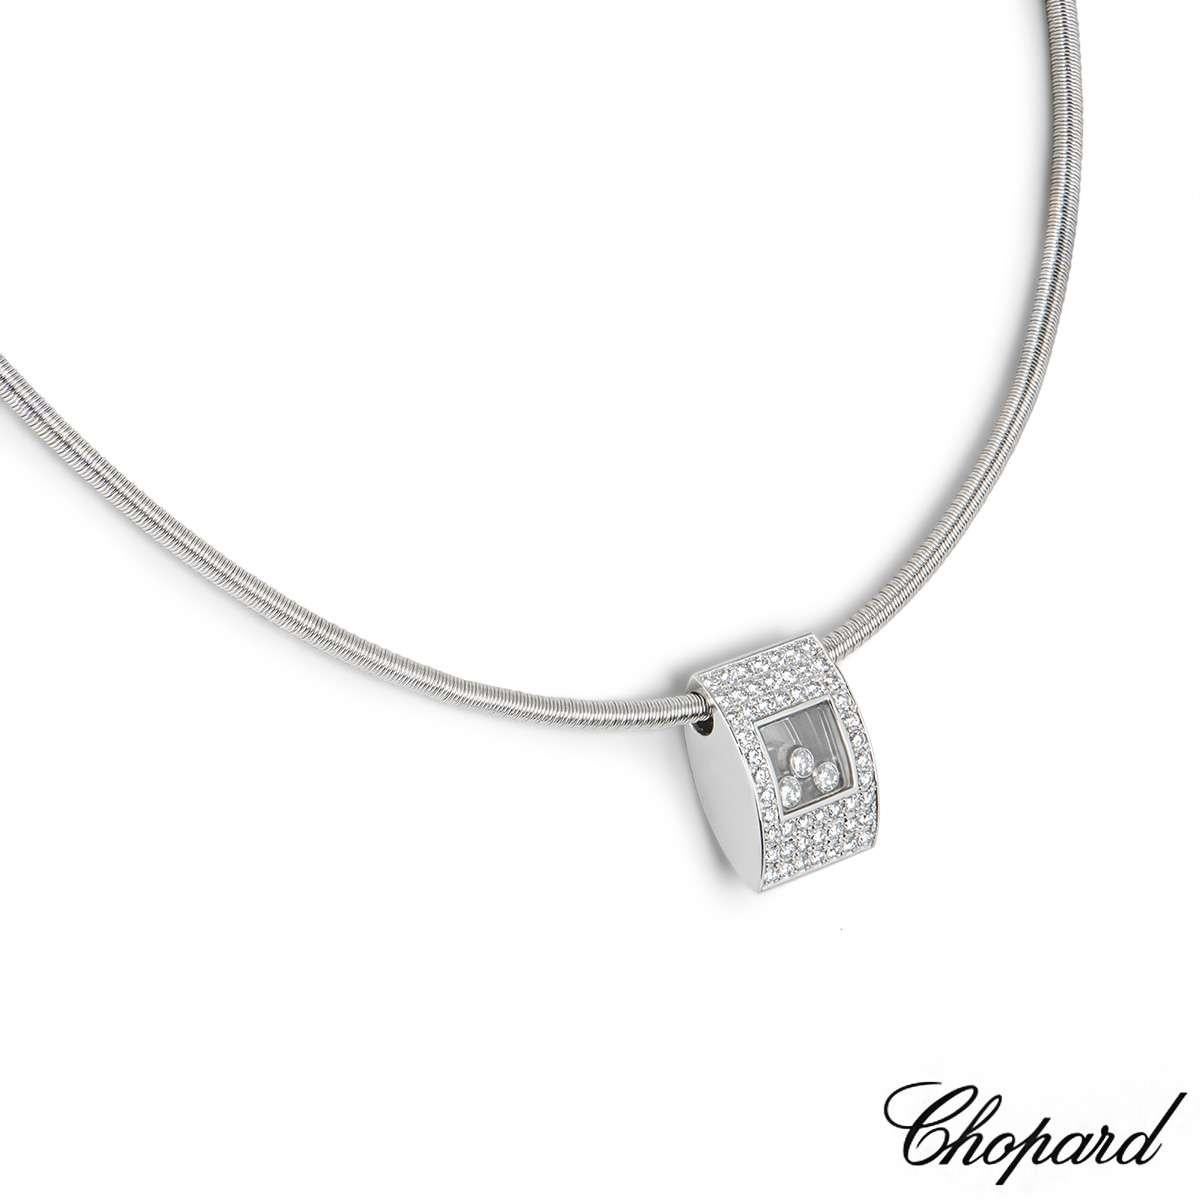 An 18k white gold necklace from the Happy Diamonds collection by Chopard. The necklace features a diamond set rectangular motif pave set with 52 round brilliant cut diamonds totalling approximately 1.04ct and 3 floating diamonds behind the Chopard